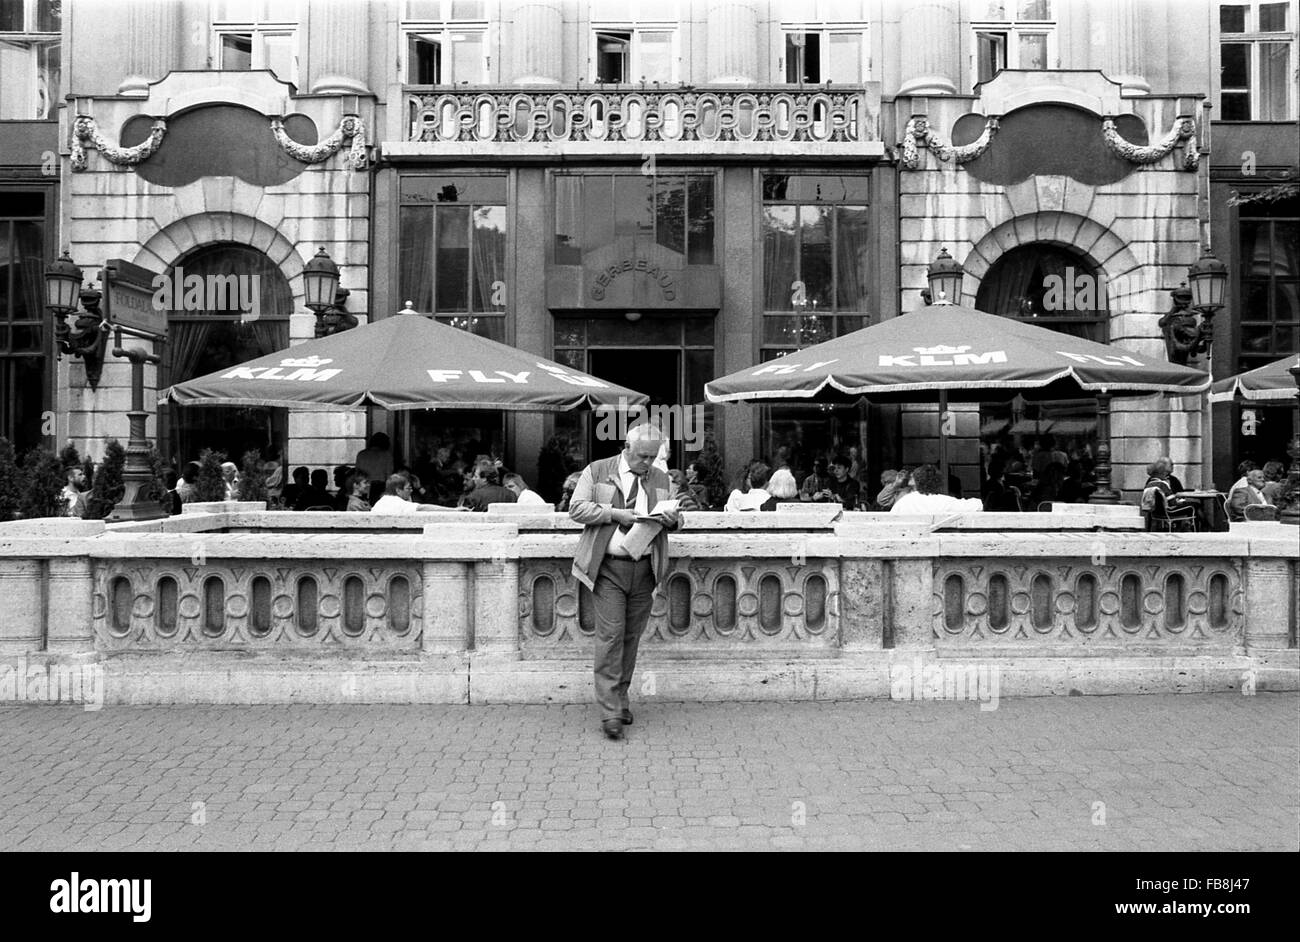 Glance on Bupapest at the time of the Nineties. -  1990  -  Hungary / Budapest  -  Glance on Bupapest at the time of the Nineties. -  Daily-life scene. A man is reading a book at the entrance of the 'Foldalatti' subway station; meanwhile some tourists and Hungarians are sitting oustide of a big restaurant of the Hosok Tere square (Heroes' Square)   -  Philippe Gras / Le Pictorium Stock Photo